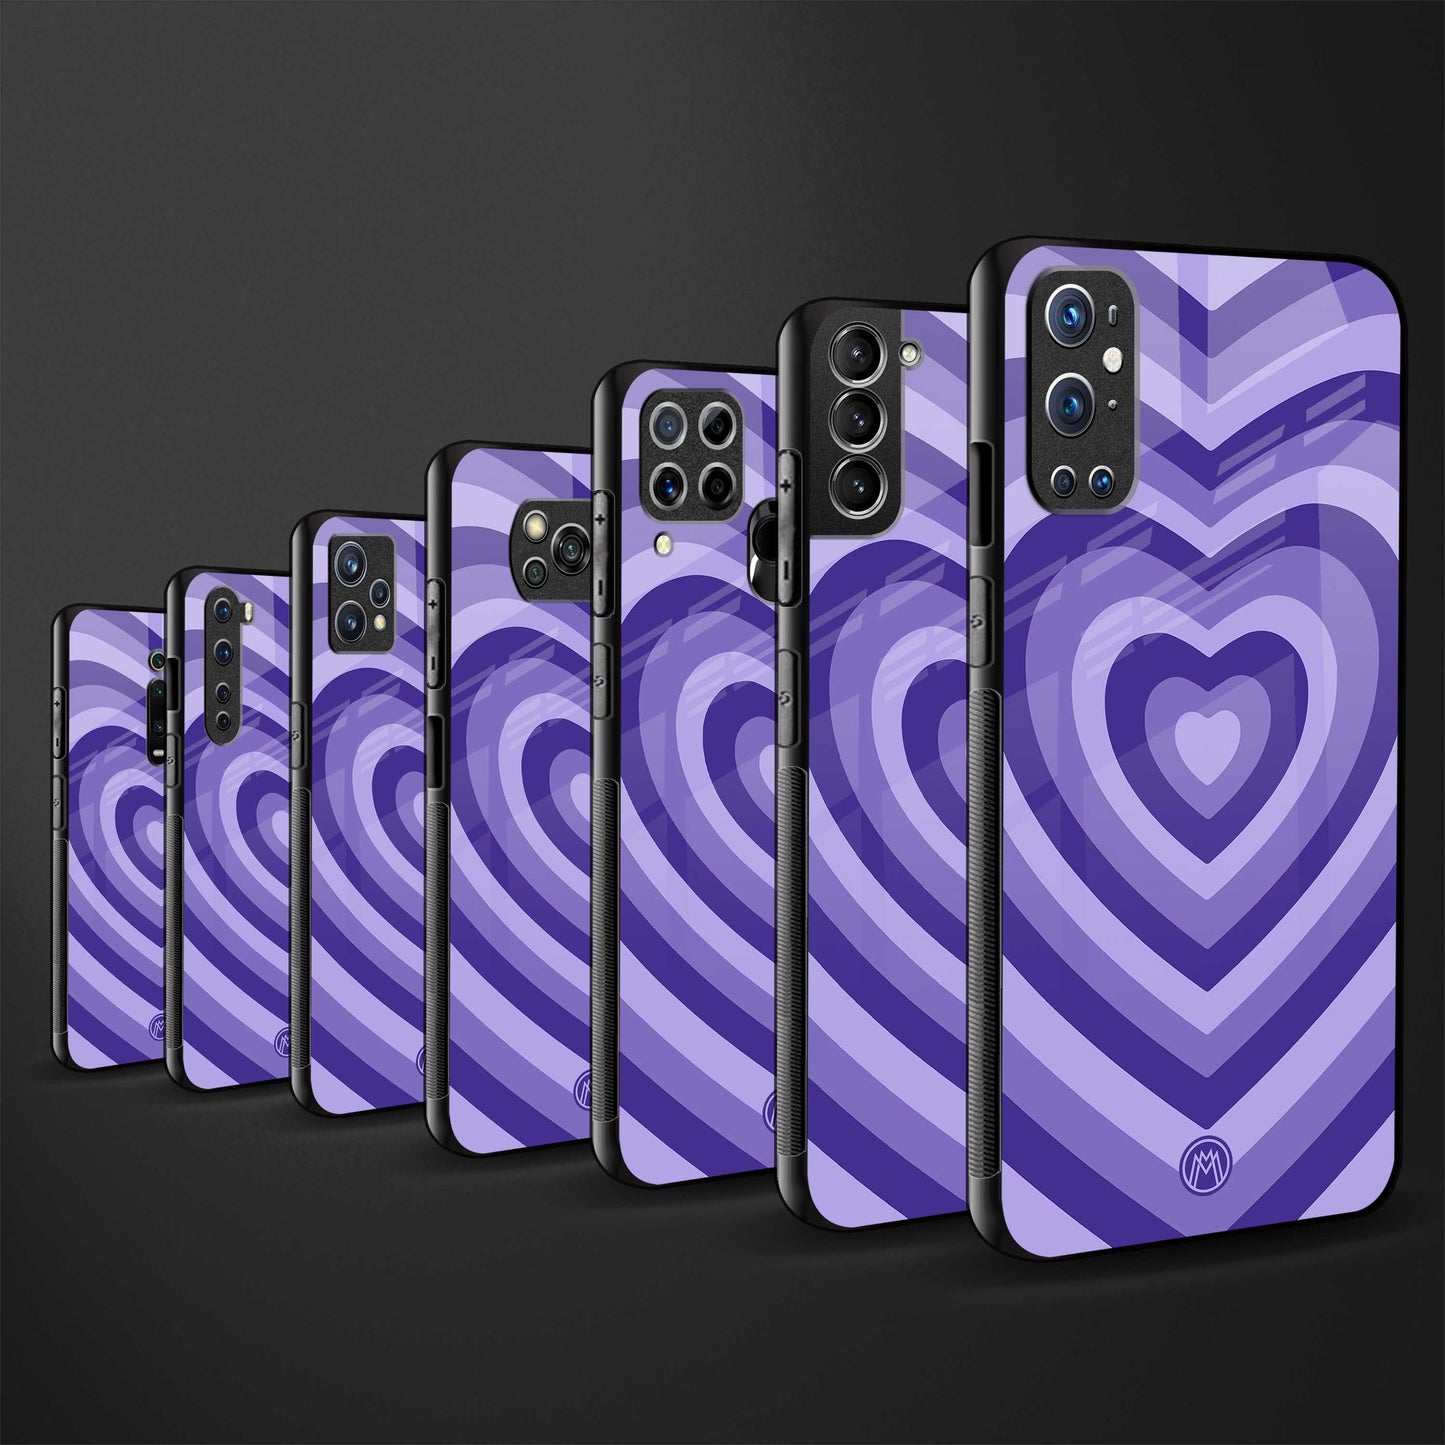 y2k purple hearts aesthetic back phone cover | glass case for oneplus nord ce 2 lite 5g